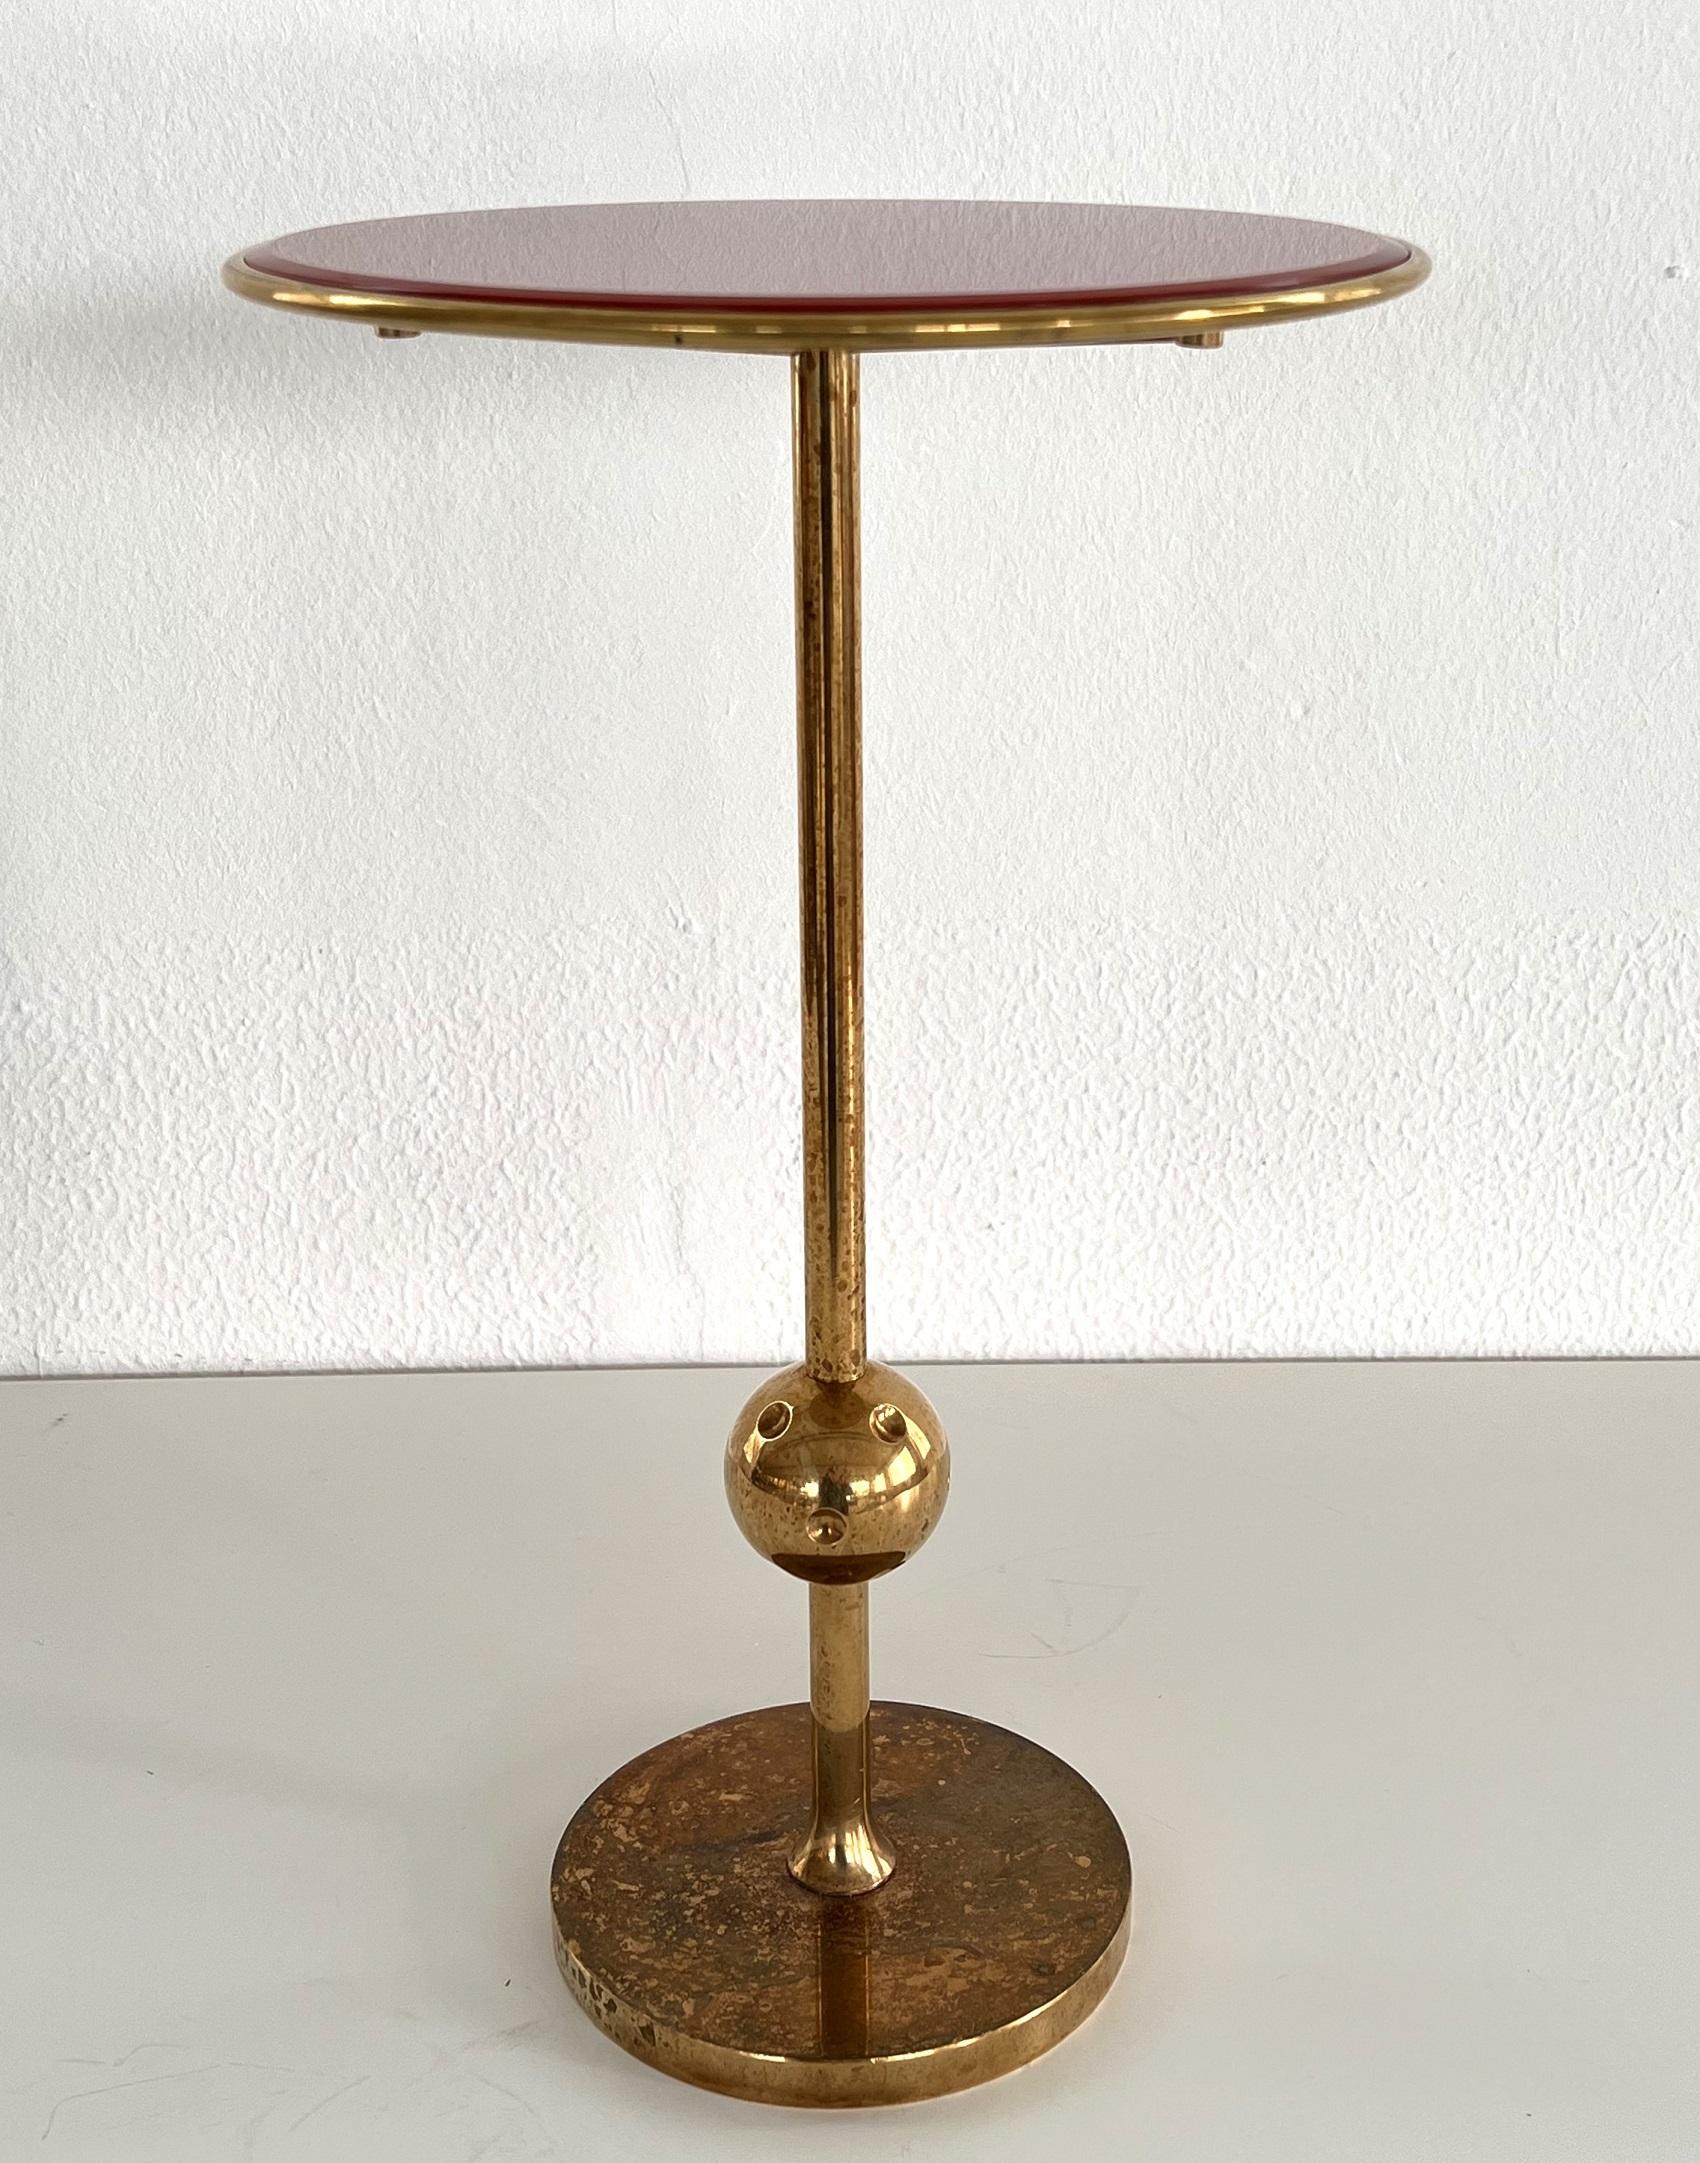 Beautiful iconic side table made in full brass and painted glass top in red color.
Designed in the 1940s by Osvaldo Borsani and produced in Tecno company in Northern Italy, Varedo.
These brass tables have never been produced in mass production but